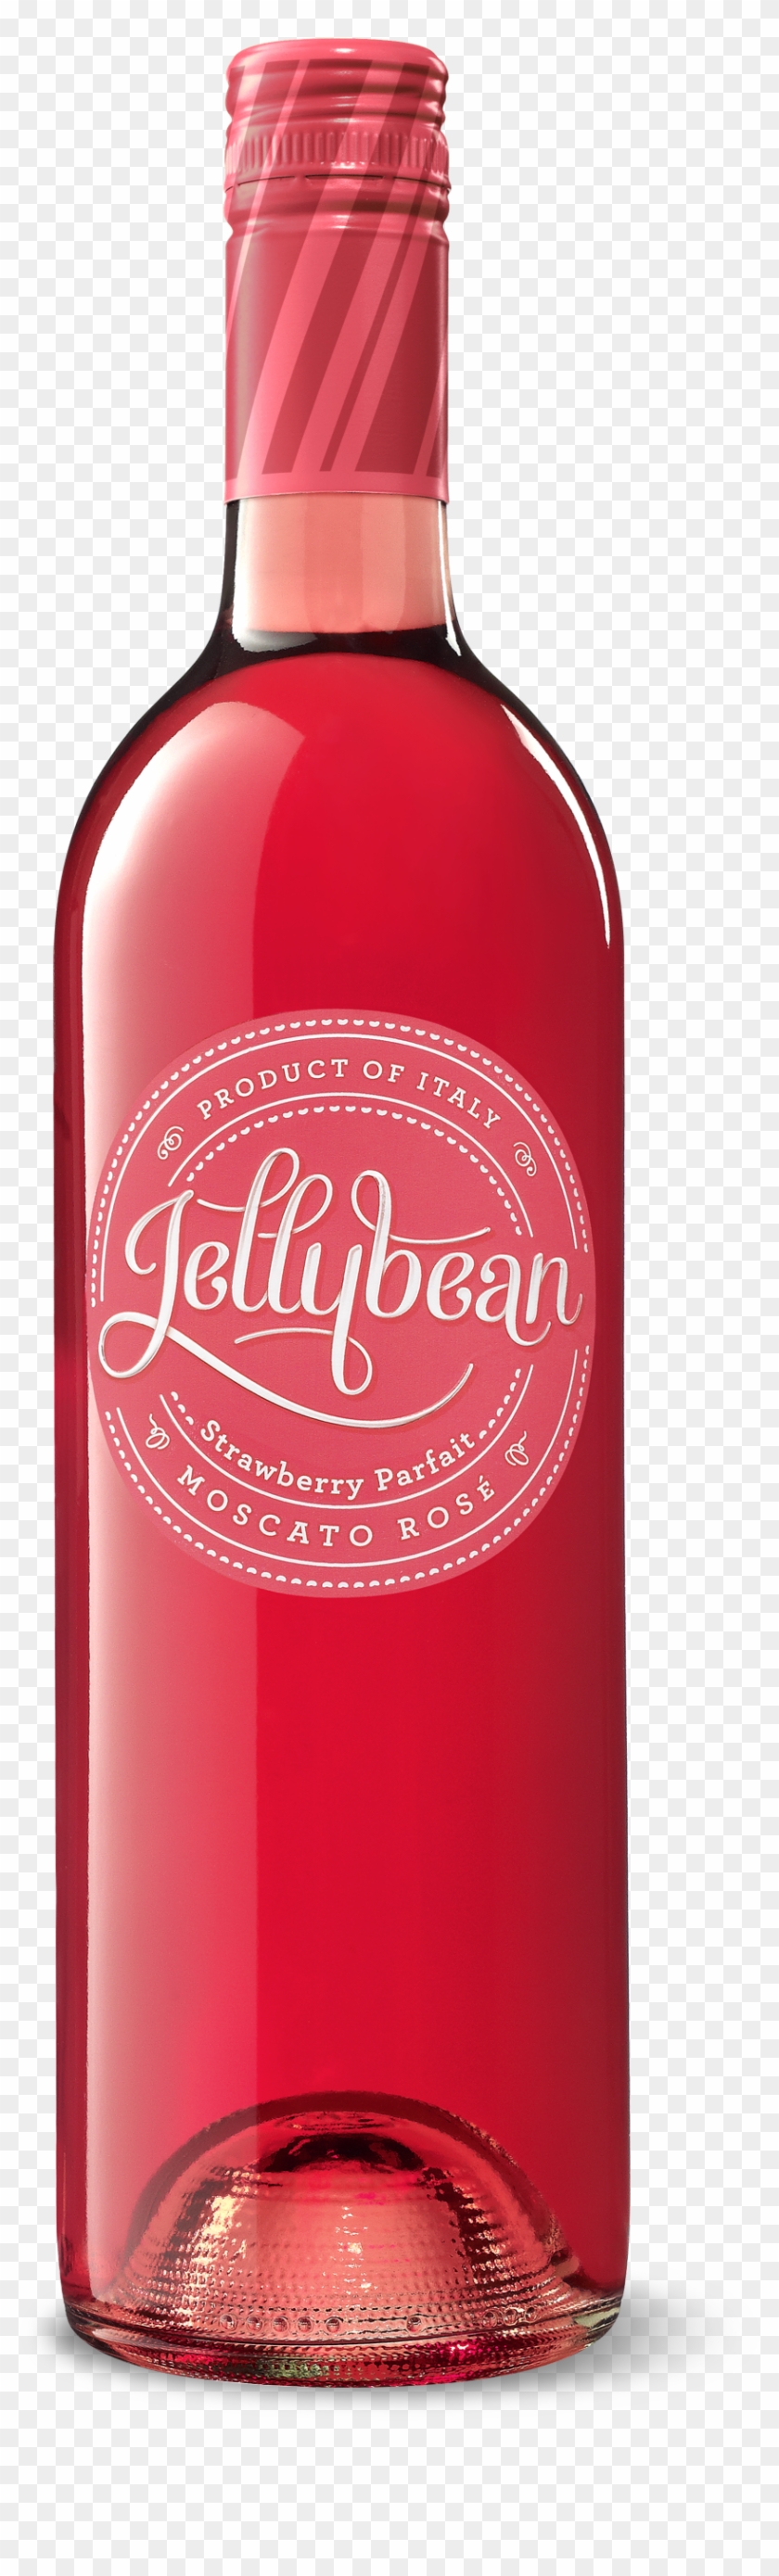 Jbw Single Moscato Rose 150 Wine Tasting Notes, Wine - Wine Bottle Png Rose Clipart #758913